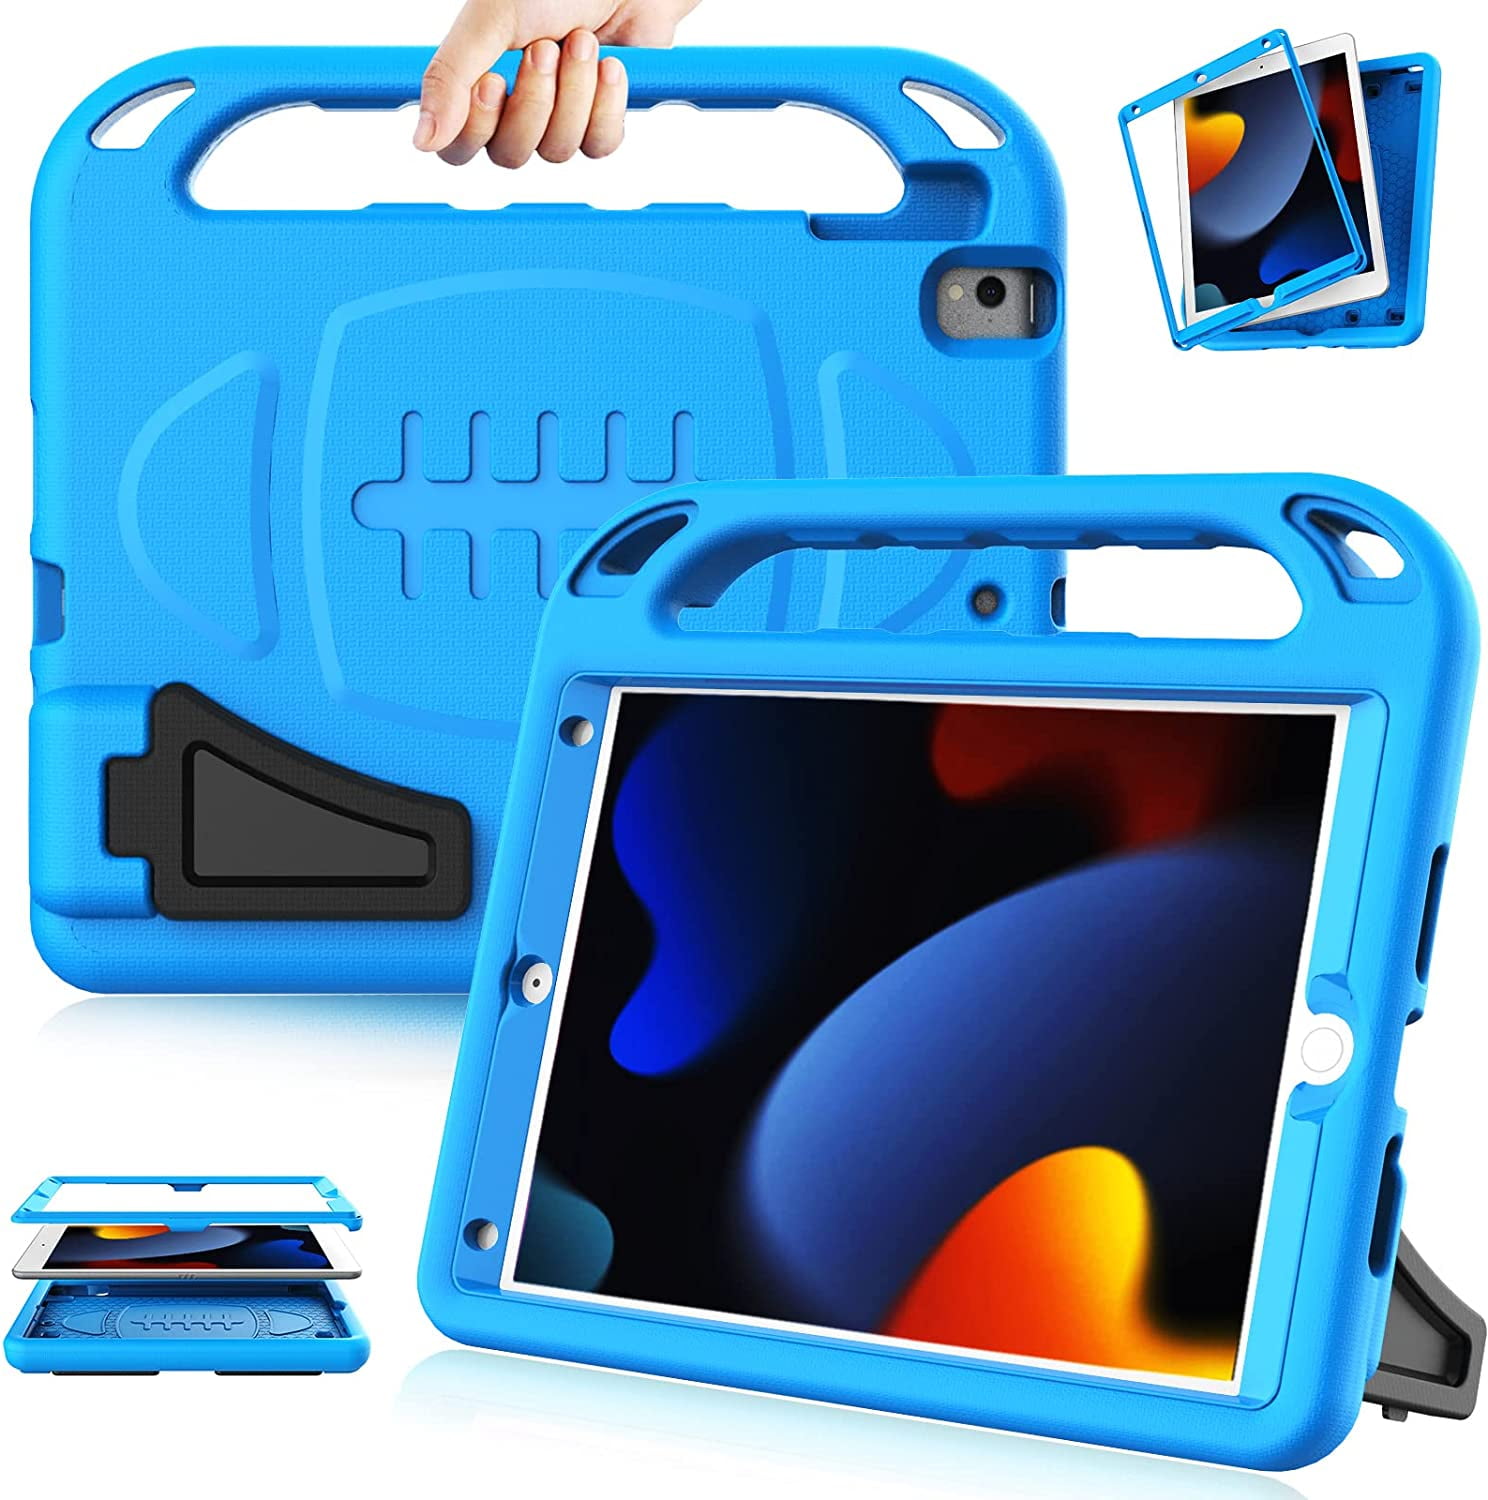 iPad 7th Generation Case LTROP iPad 10.2 Case iPad 10.2 2019 Case for Kids Turquoise Light Weight Shock Proof Stand Handle Kids Case for Apple iPad 7 10.2-Inch 2019 Latest Model and Air 3 